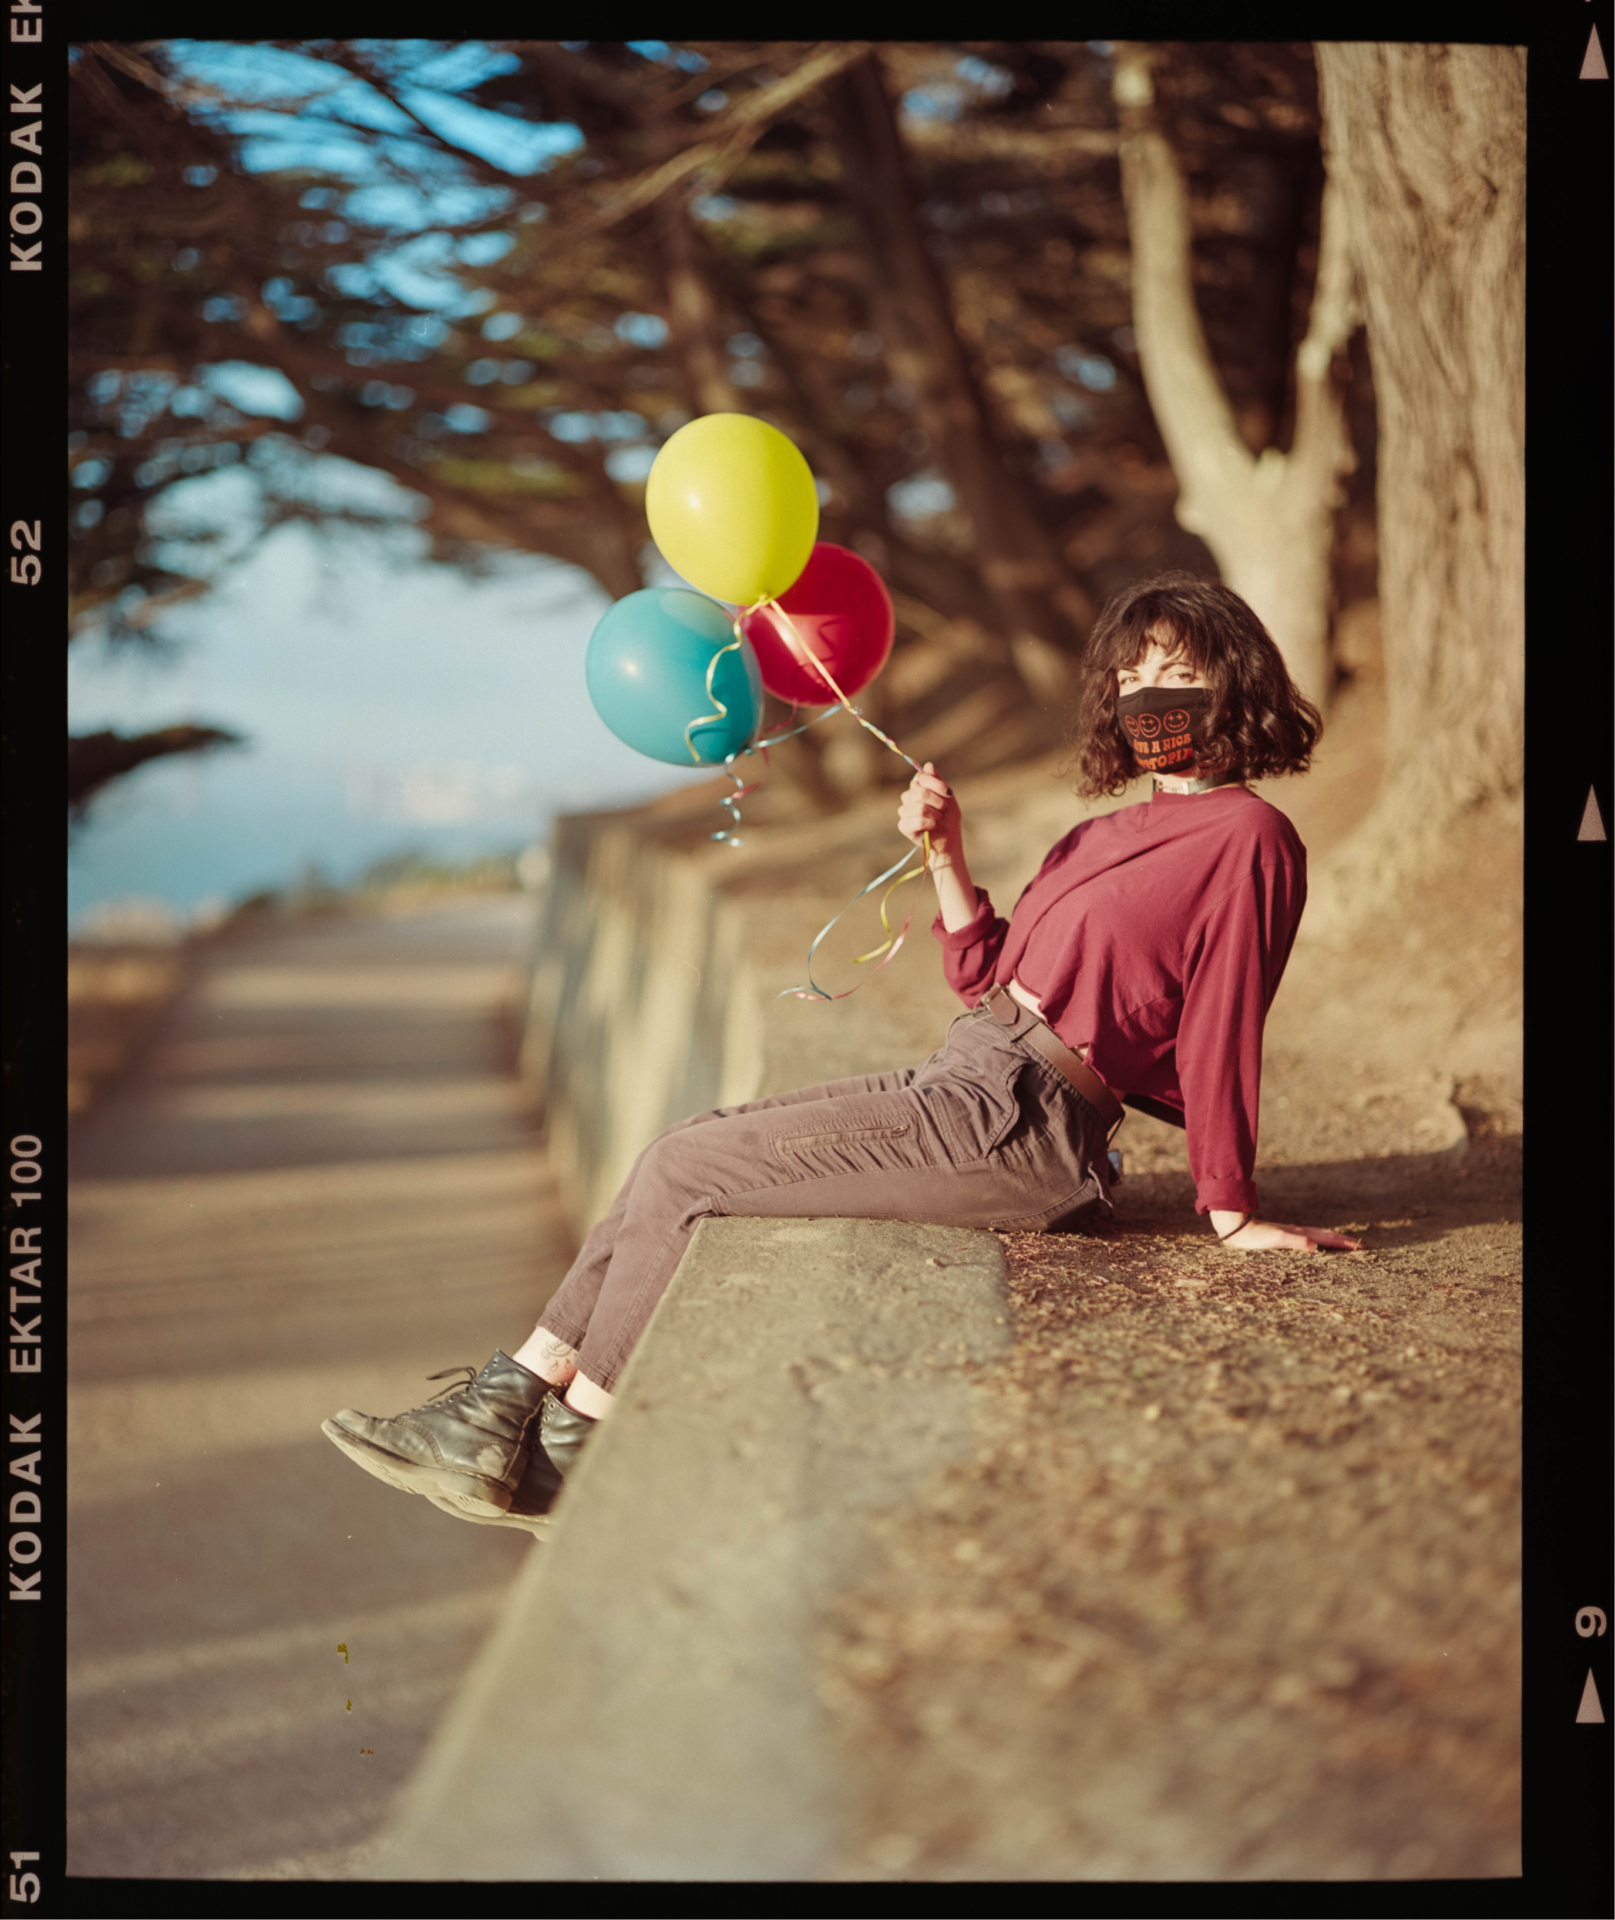 Photograph of Laura posing with some balloons near Lands End during the golden hour